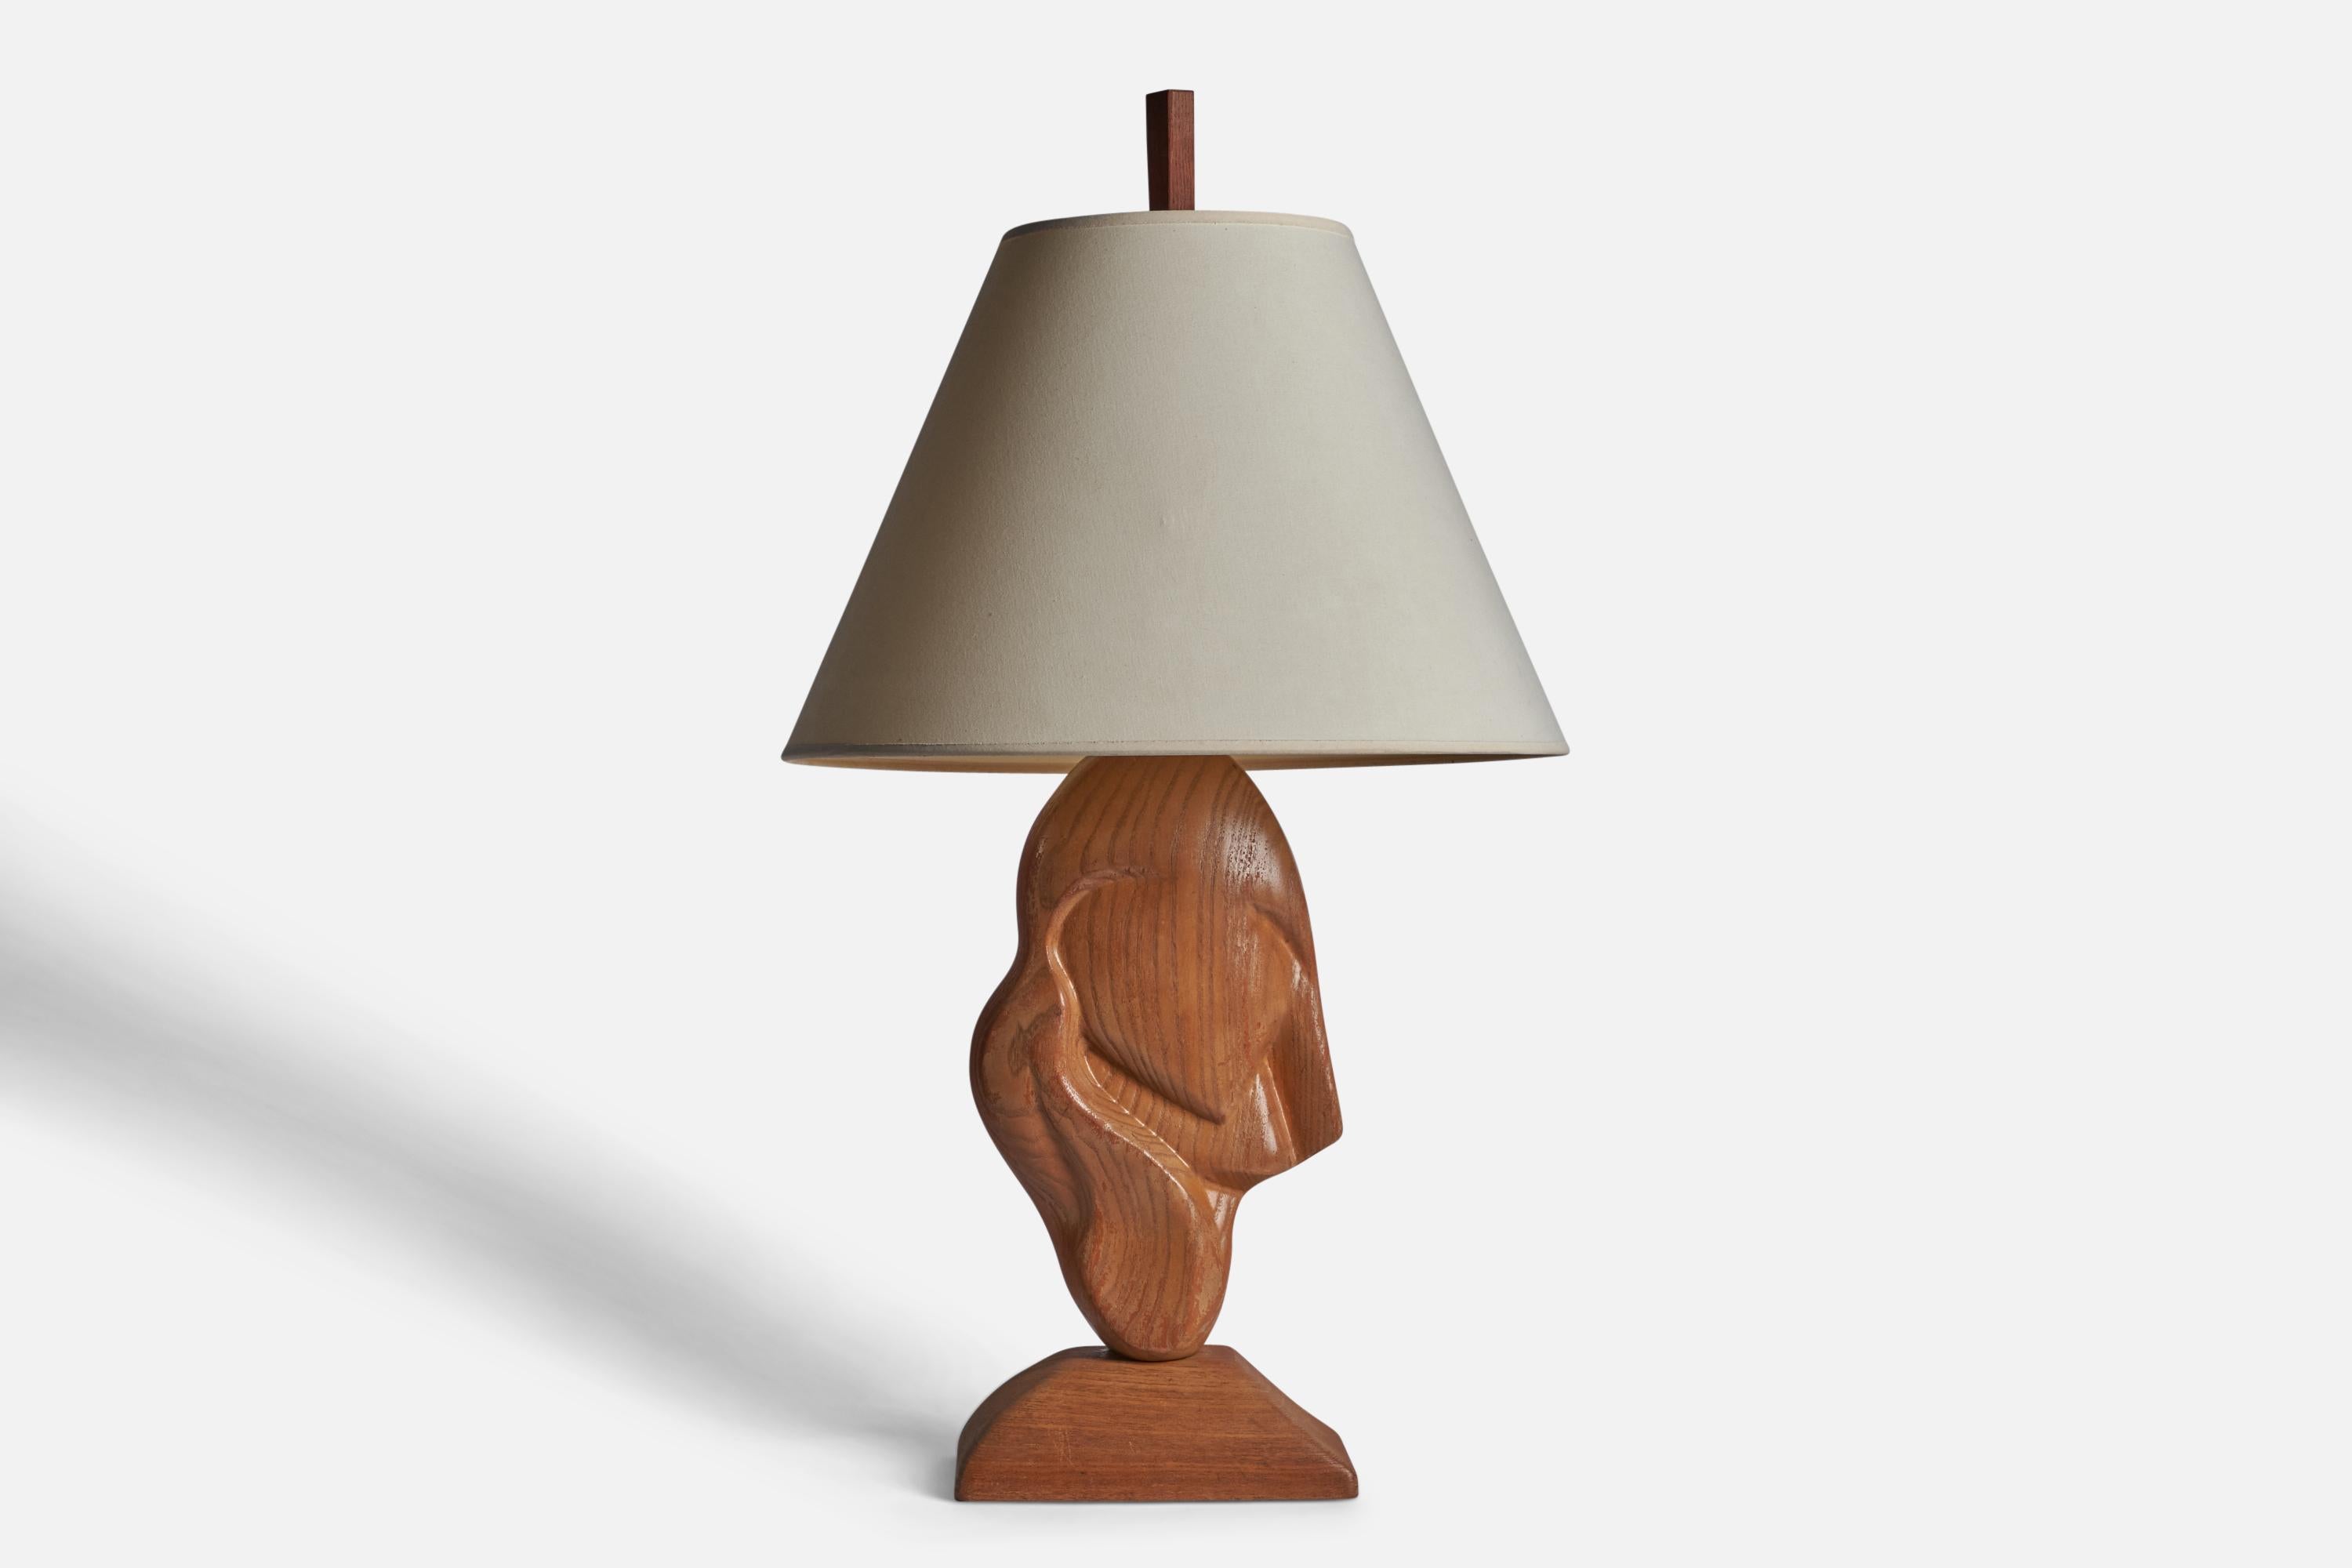 An oak and off-white fabric freeform table lamp designed and produced in the US, 1950s.

Overall Dimensions (inches): 32.5” H x 18” Diameter
Bulb Specifications: E-26 Bulb
Number of Sockets: 1